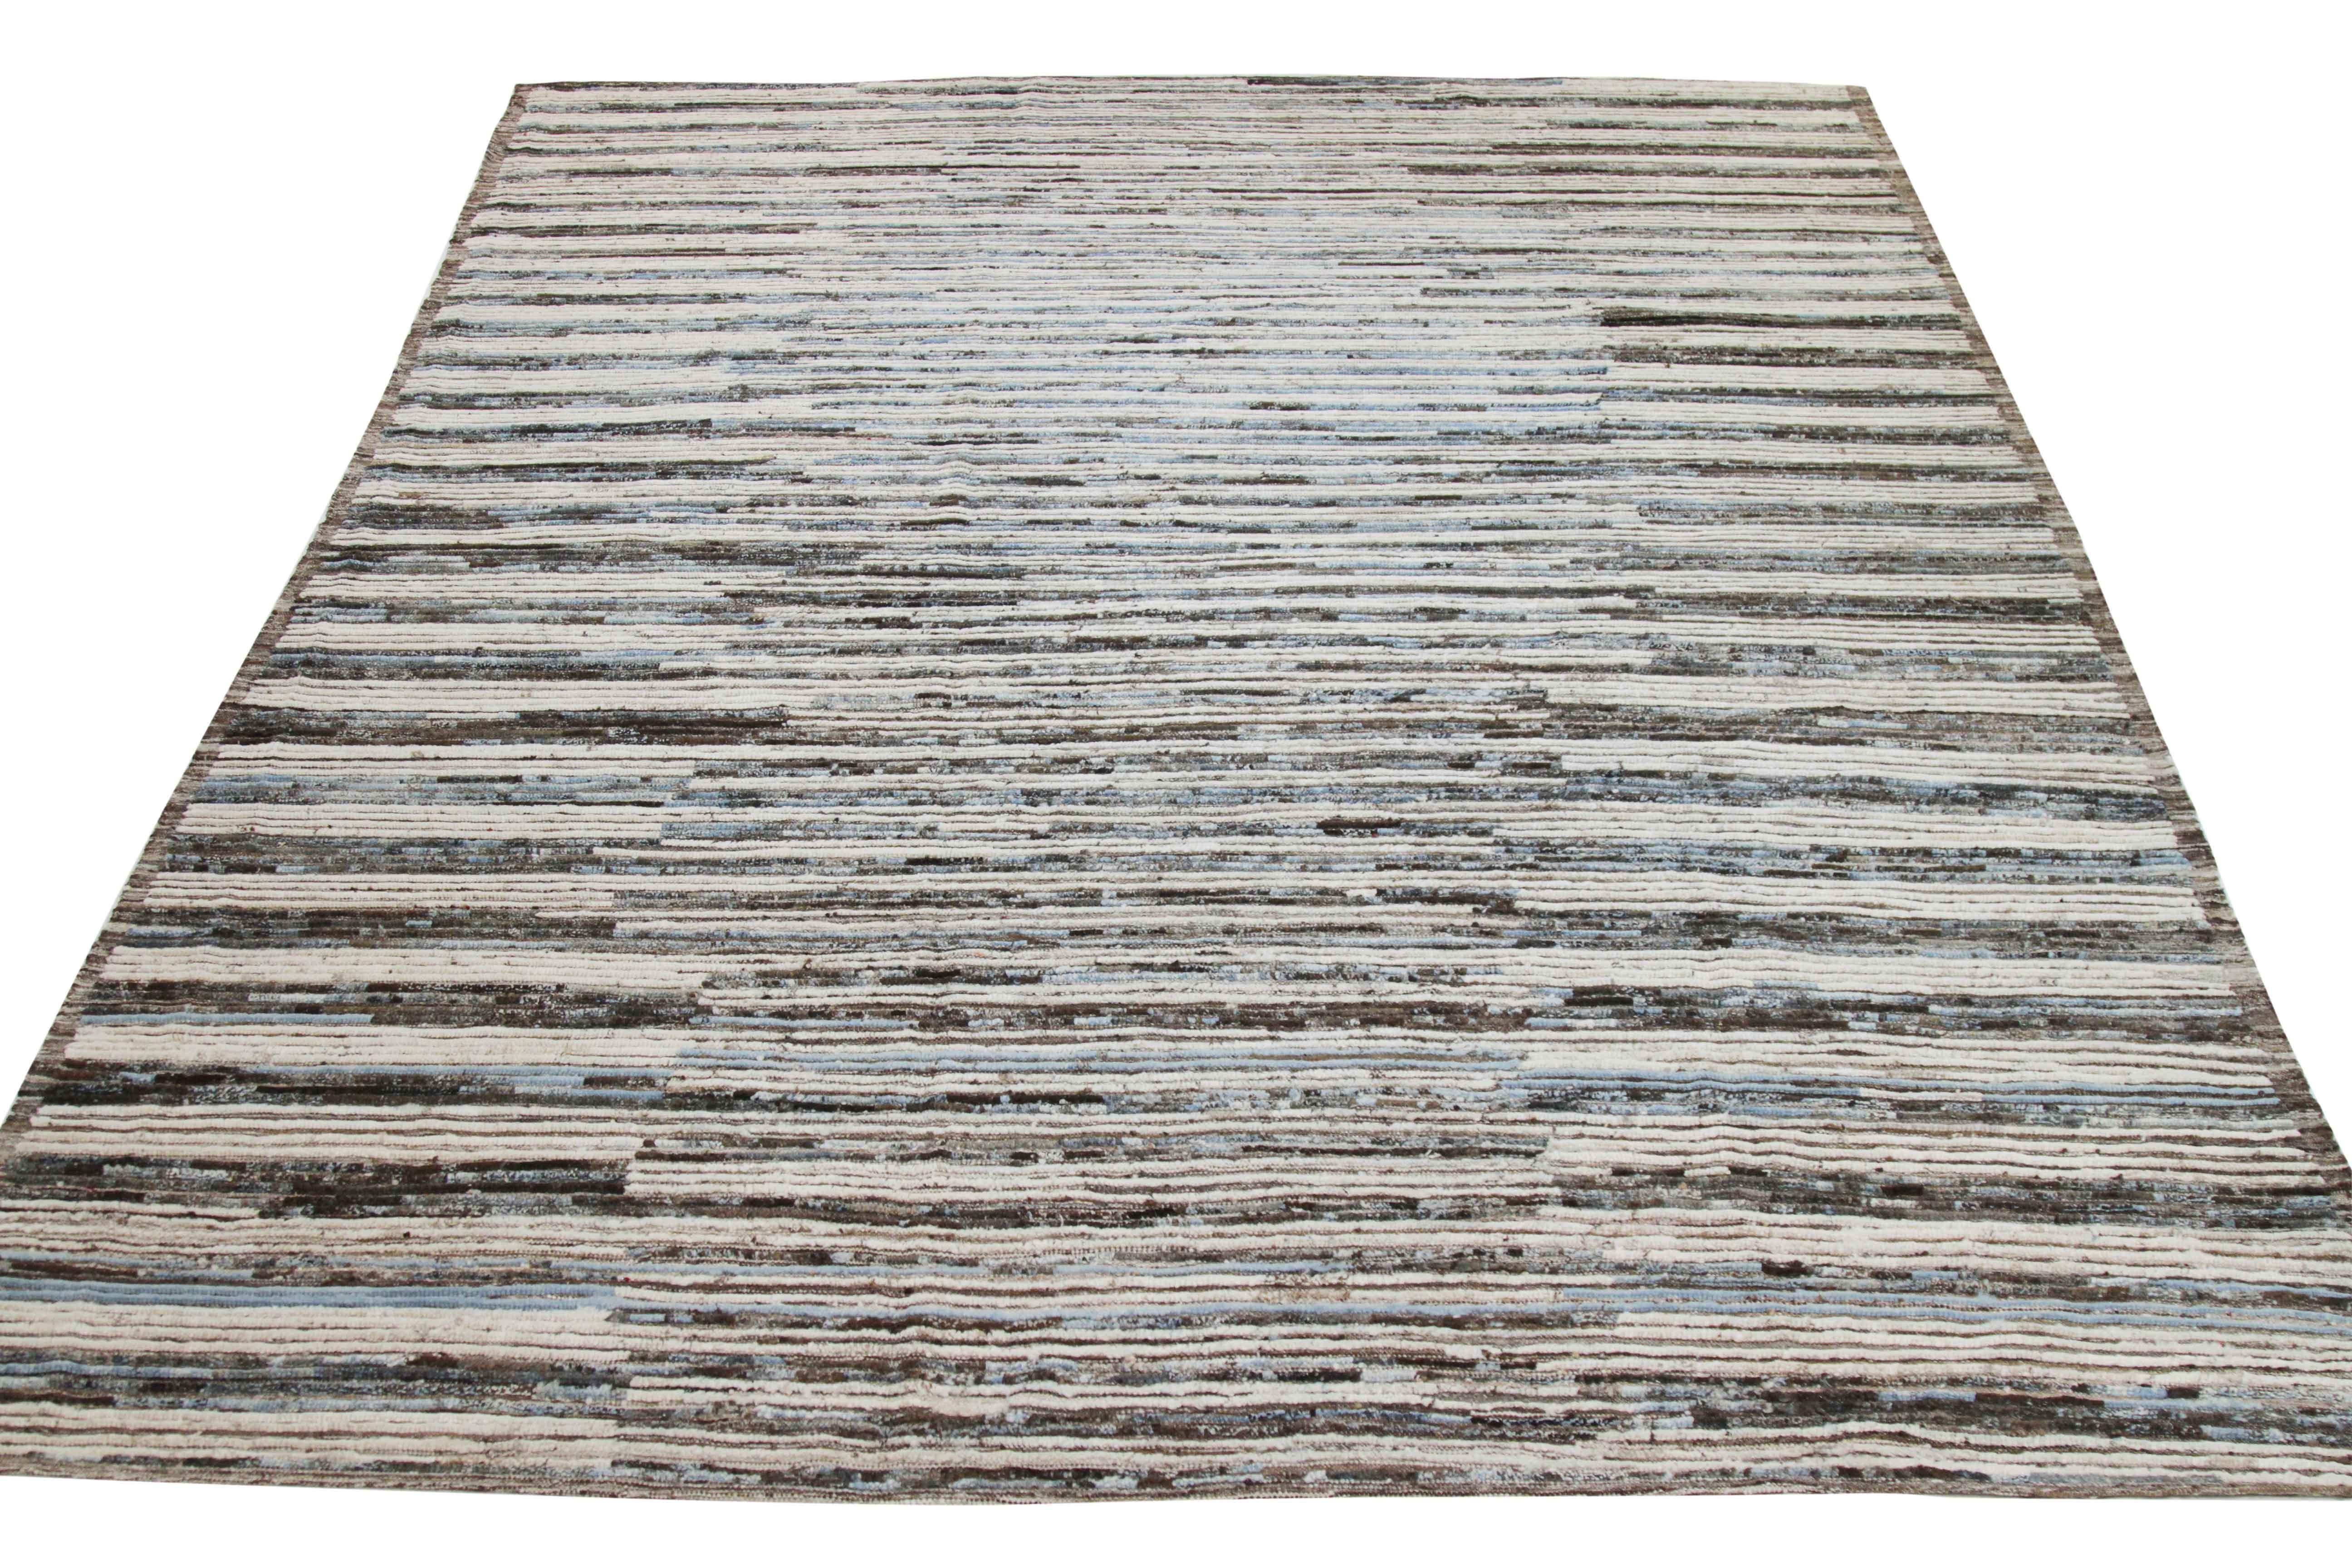 Modern Afghan rug handwoven from the finest sheep’s wool and colored with all-natural vegetable dyes that are safe for humans and pets. It’s a traditional Afghan weaving featuring a Moroccan inspired design highlighted by sky blue and brown streaks